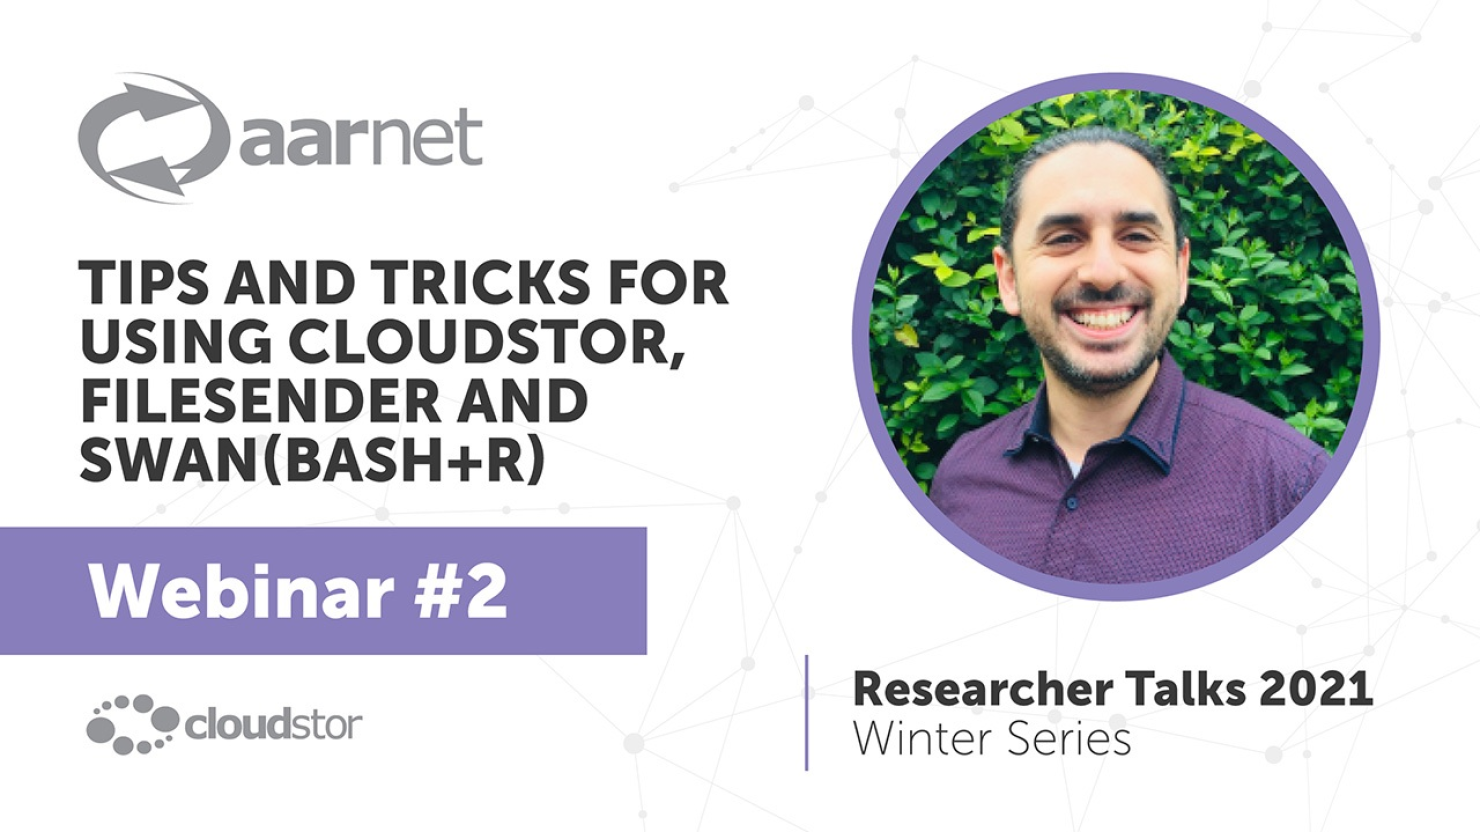 AARNet CloudStor Researcher Talks: Tips and tricks for using CloudStor, FileSender and SWAN (Bash+R)